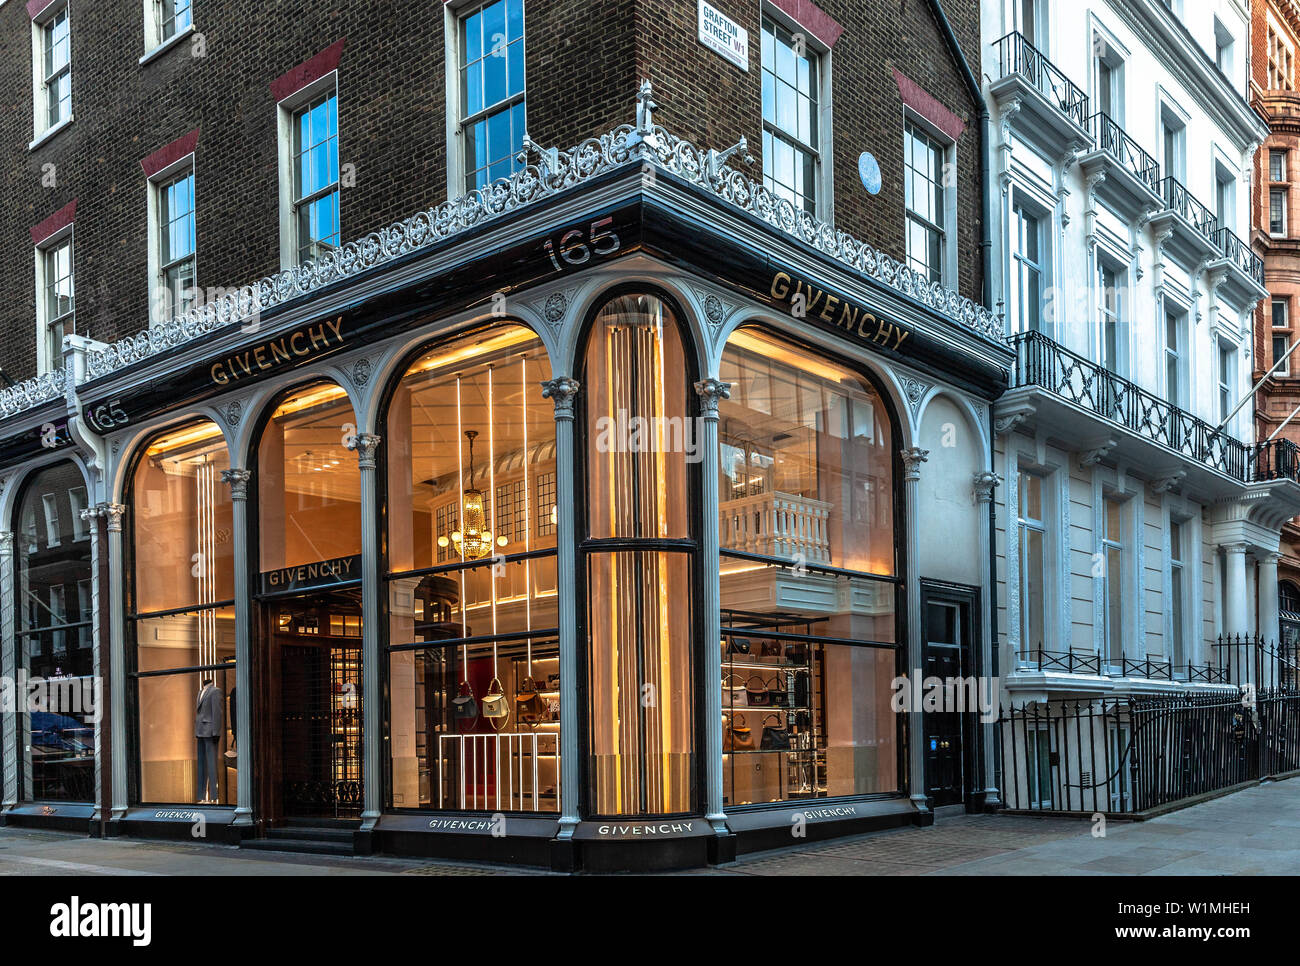 A Givenchy store at 165 New Bond St, Mayfair, London W1S 4AR, England, UK. Stock Photo